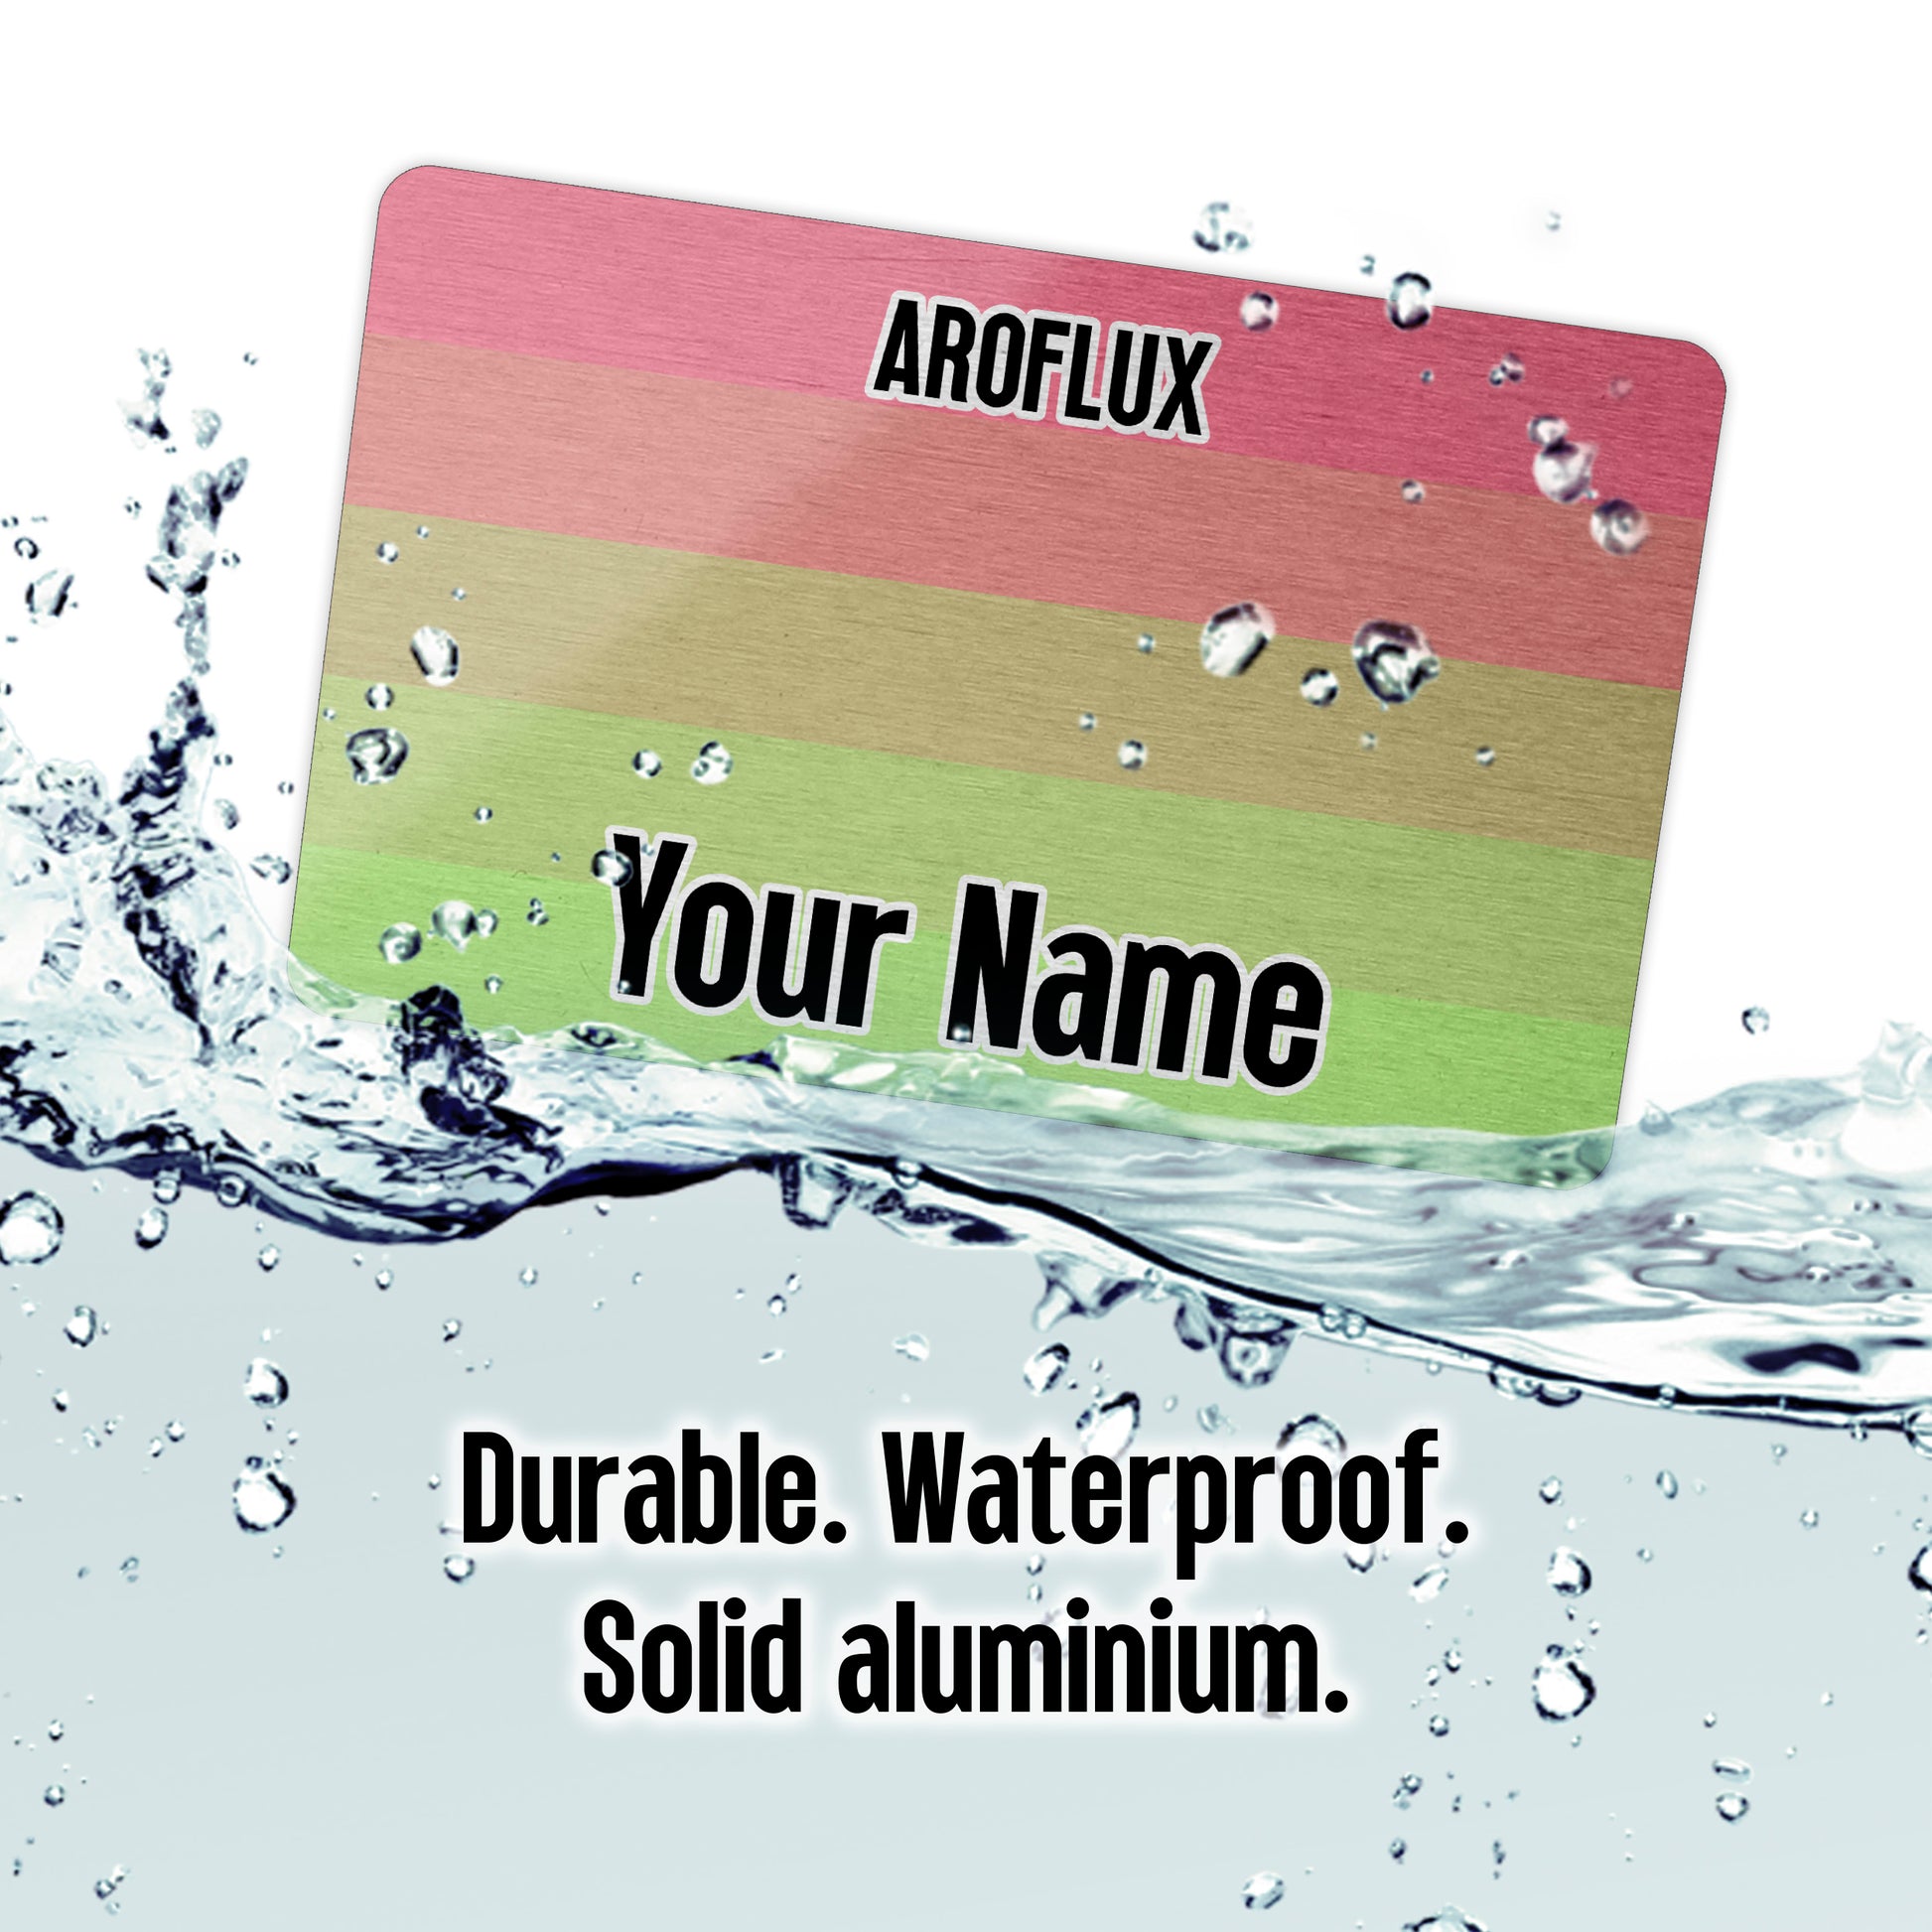 Aluminium wallet card personalised with your name and the aroflux pride flag